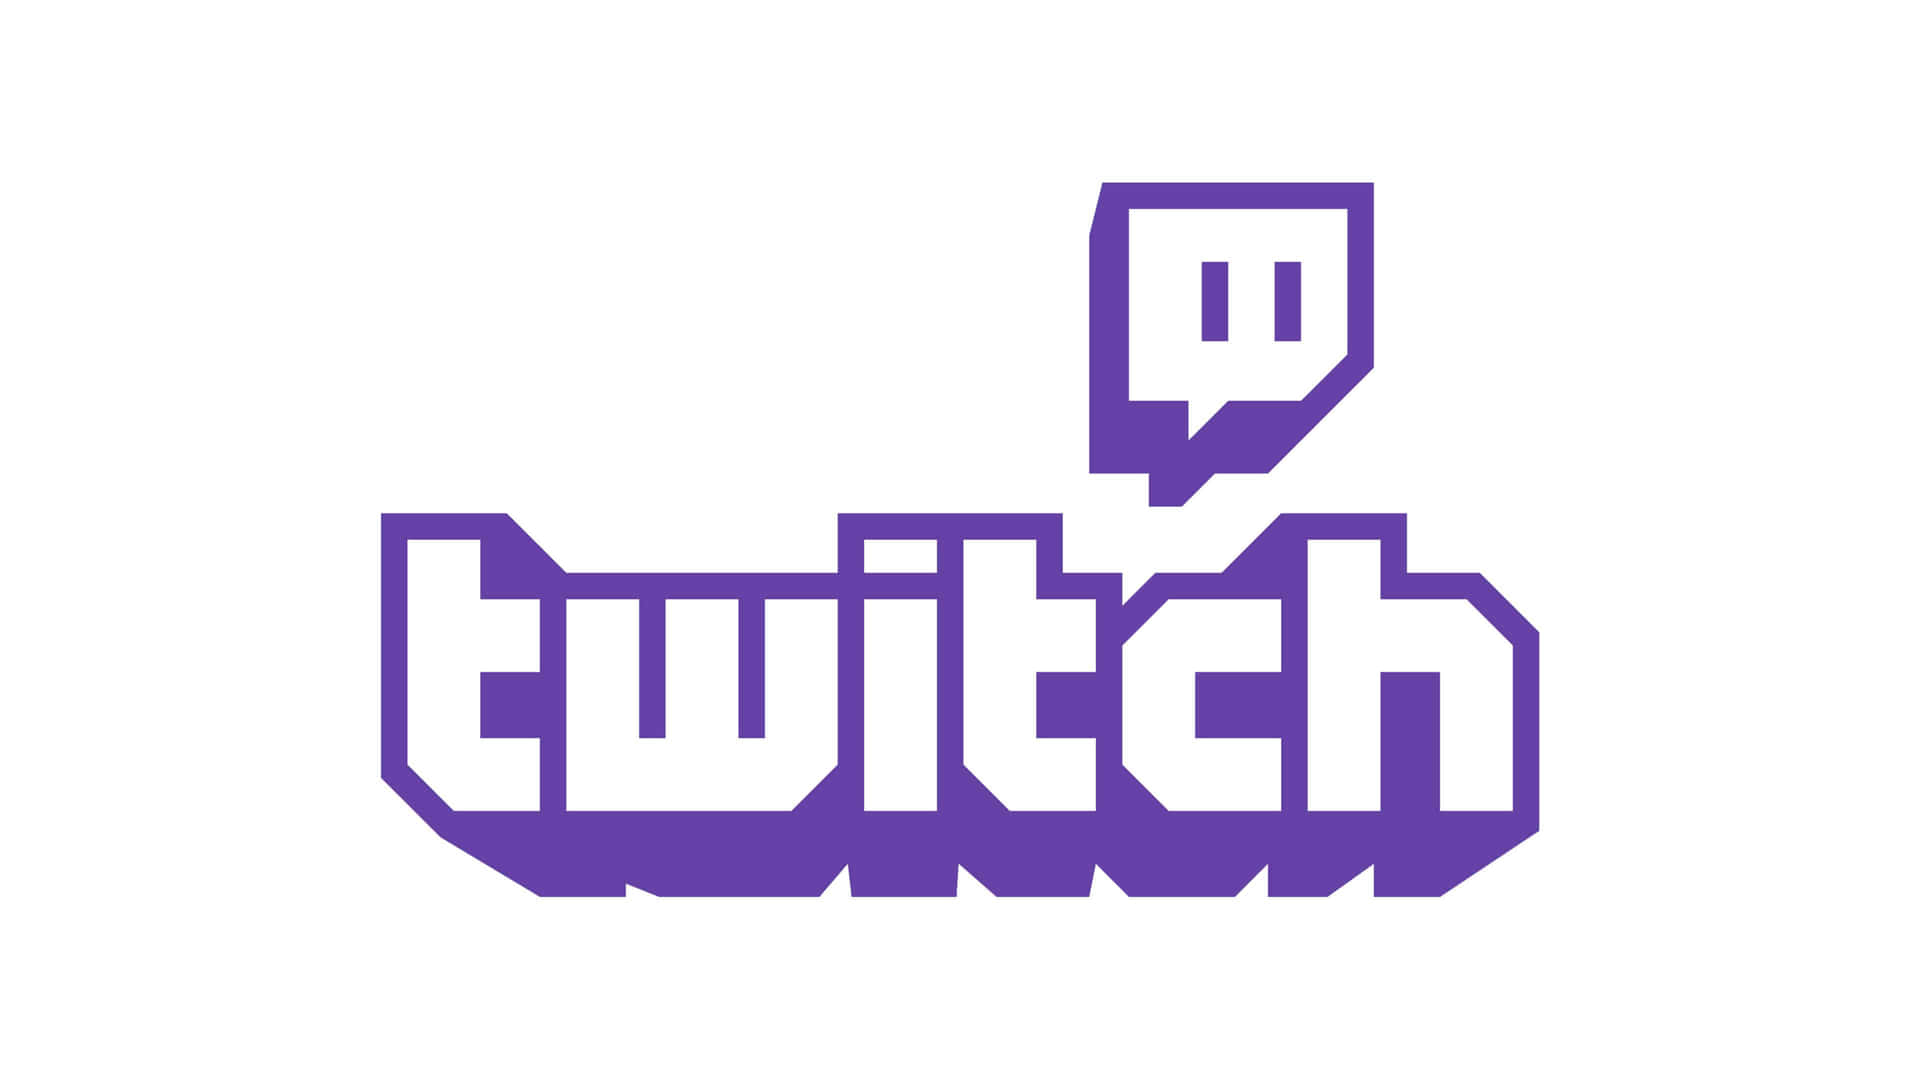 Stream on Twitch and Join the World of Live Entertainment